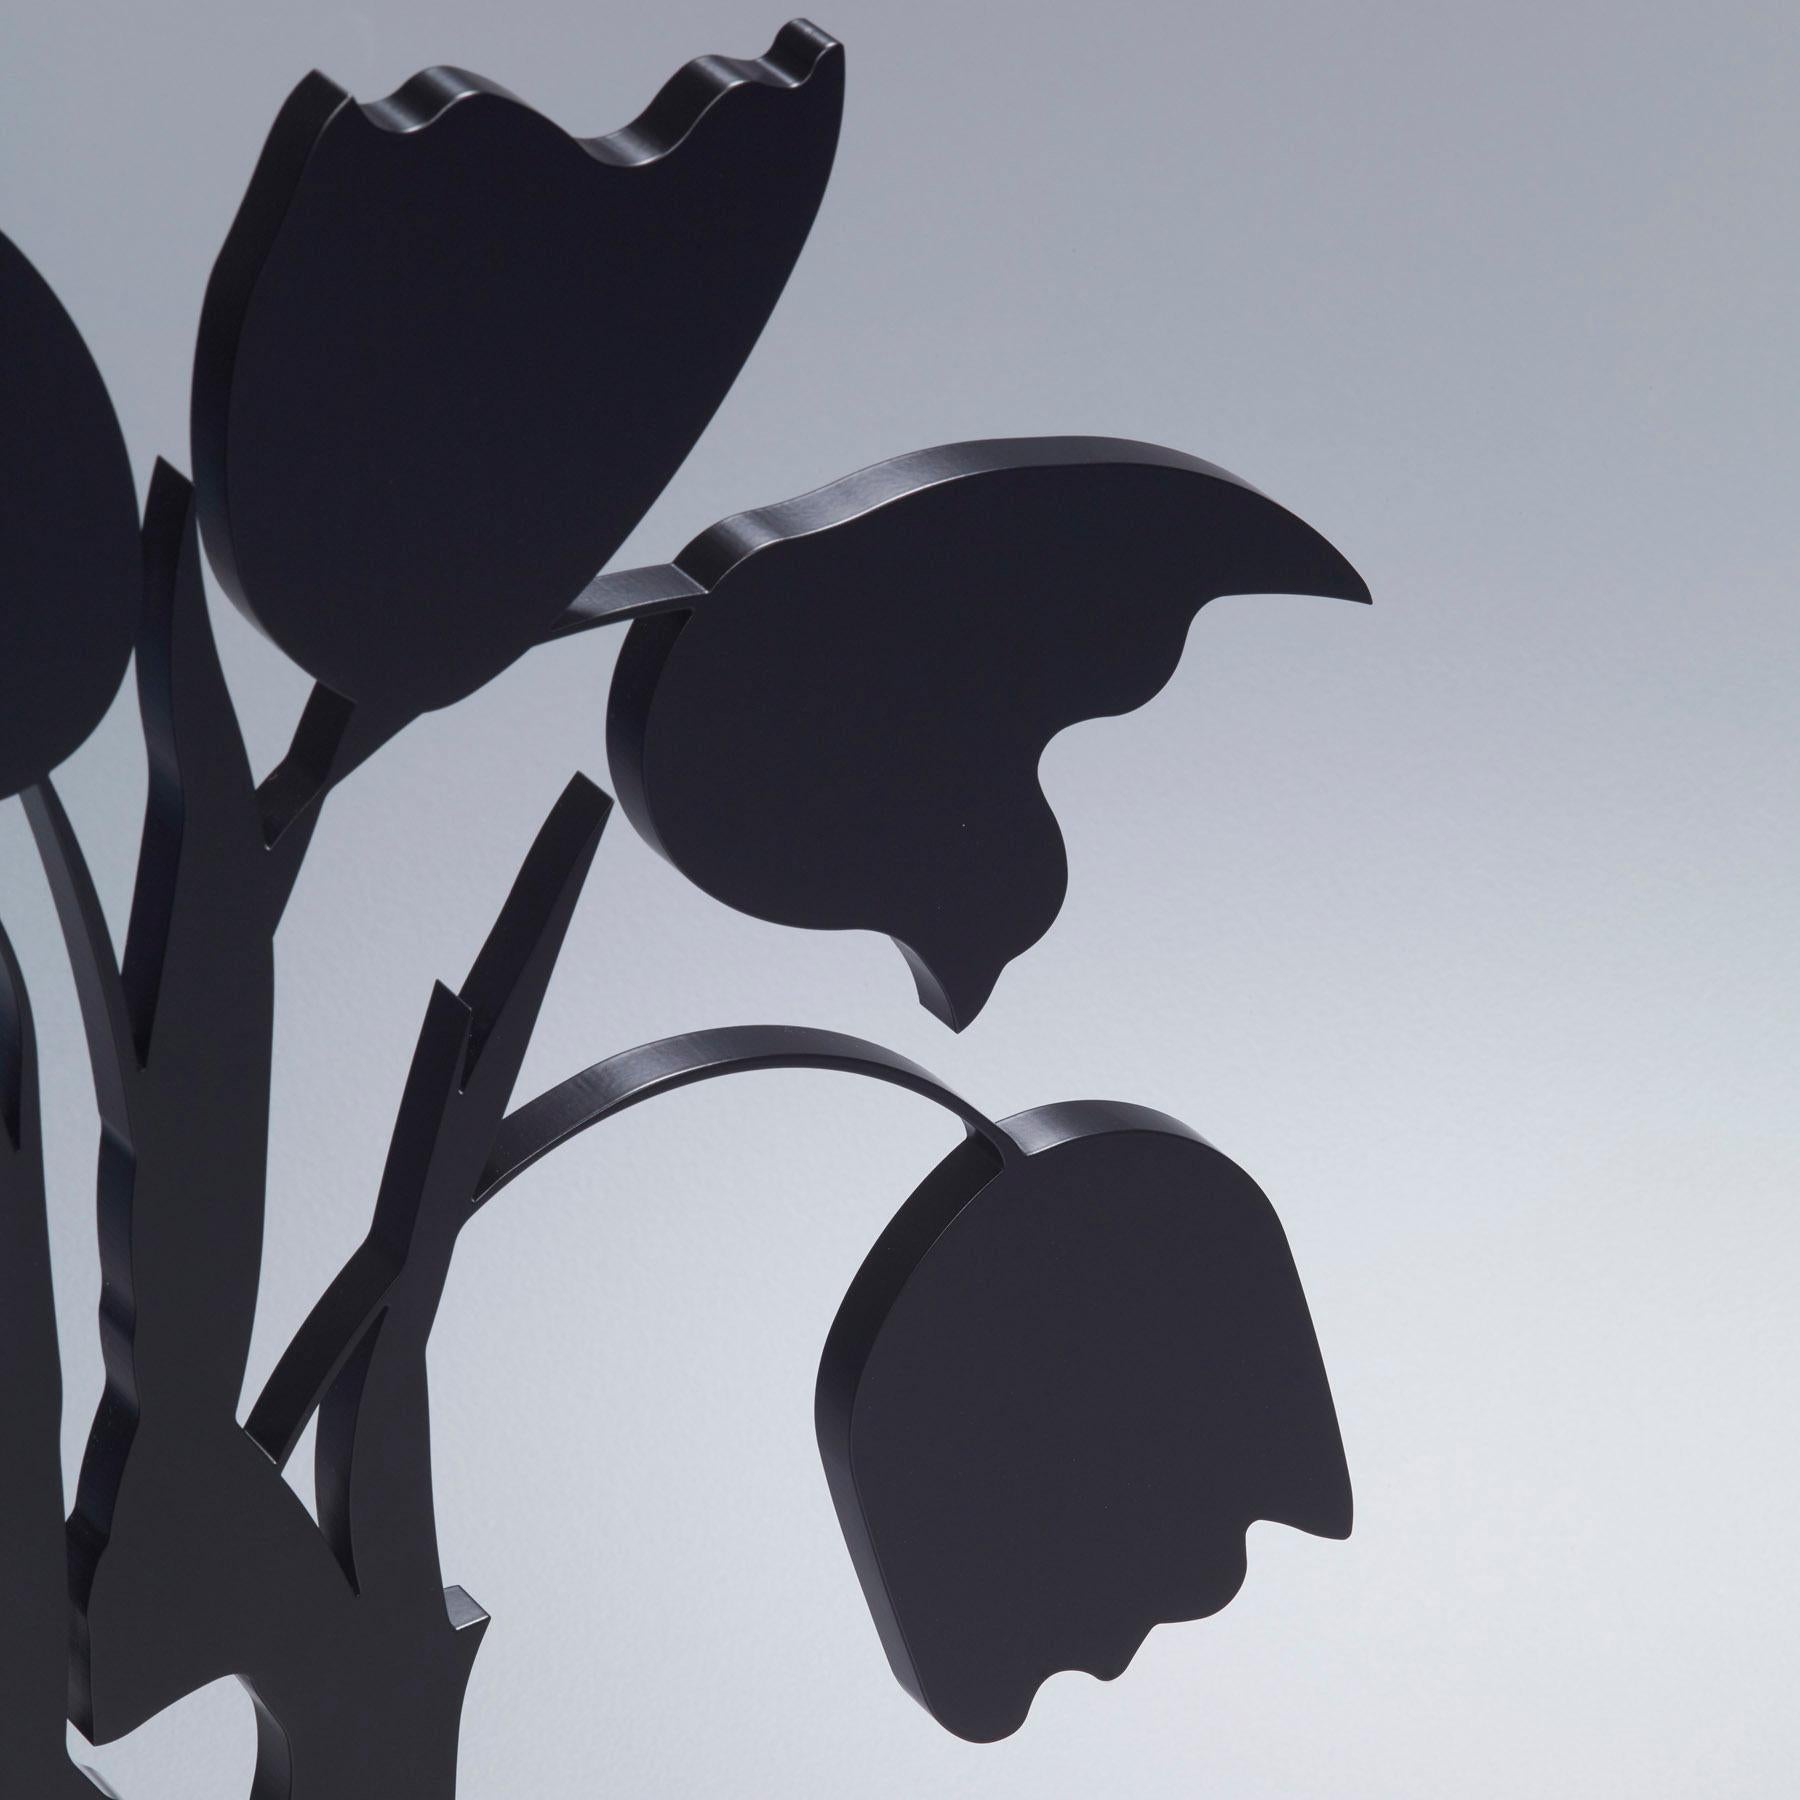 Belonging to the famous Flower series, this sculpture is an abstract reinterpretation of still life tradition.

Donald Sultan, Black Tulips and Vase, April 5
Black Tulips and Vase, April 5 - Contemporary, 21st Century, Sculpture, Black 
Painted